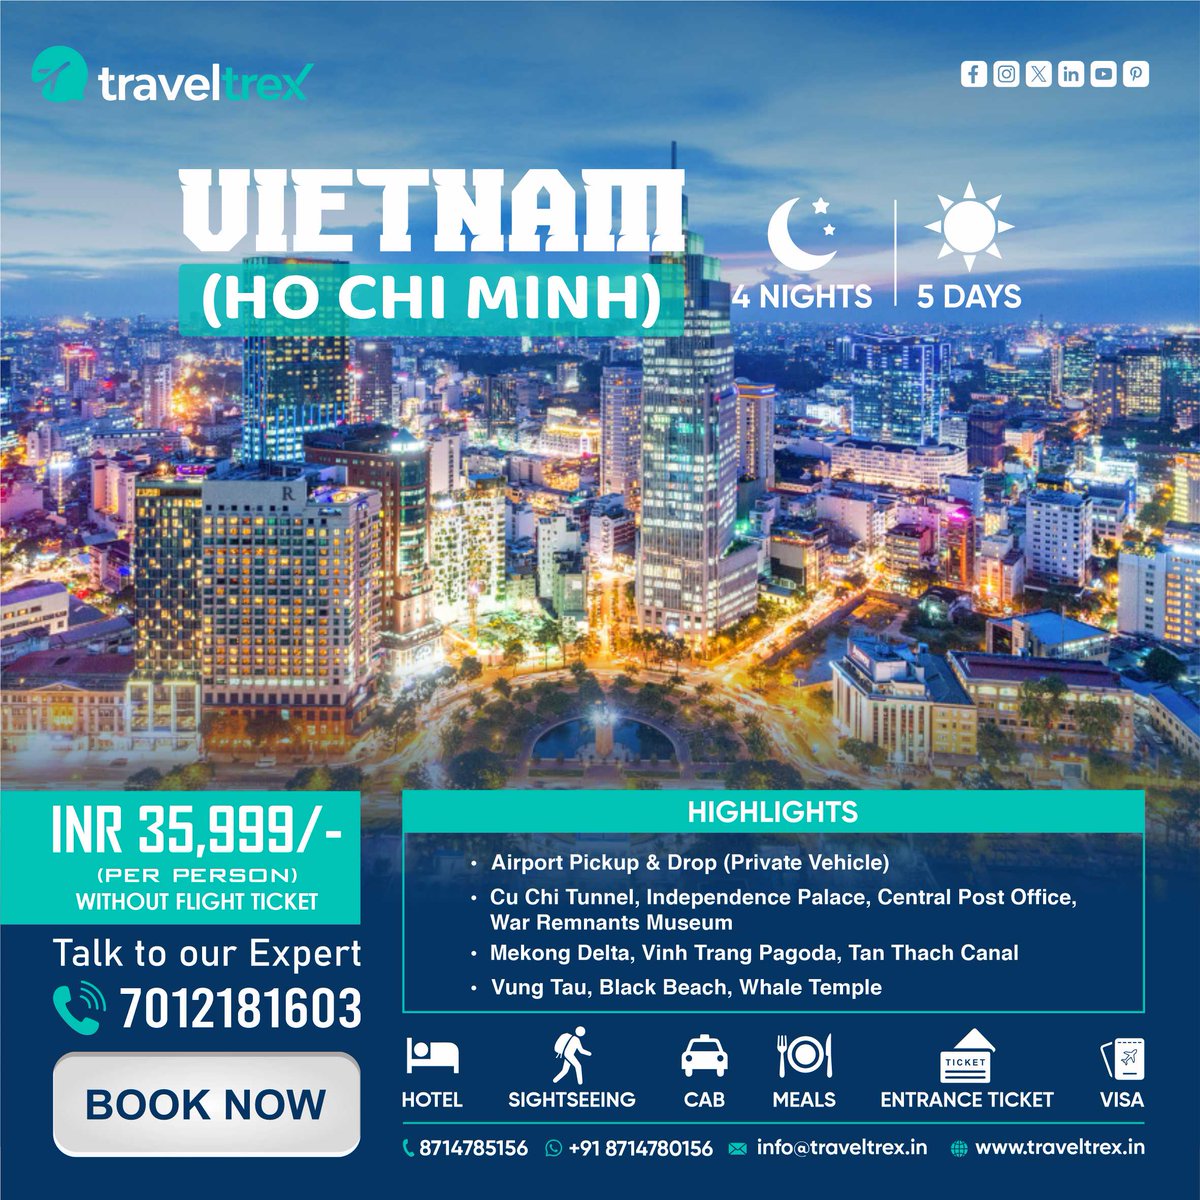 Experience the vibrant tapestry of Vietnam's rich heritage and captivating culture with our exclusive Ho Chi Minh City Holiday Package✈
#VisitVietnamNow #BookYourVietnamTripToday #IndianTravelers #IndiaToVietnam #VisitVietnamNow #IndiaVietnamTourism #VietnamForIndians